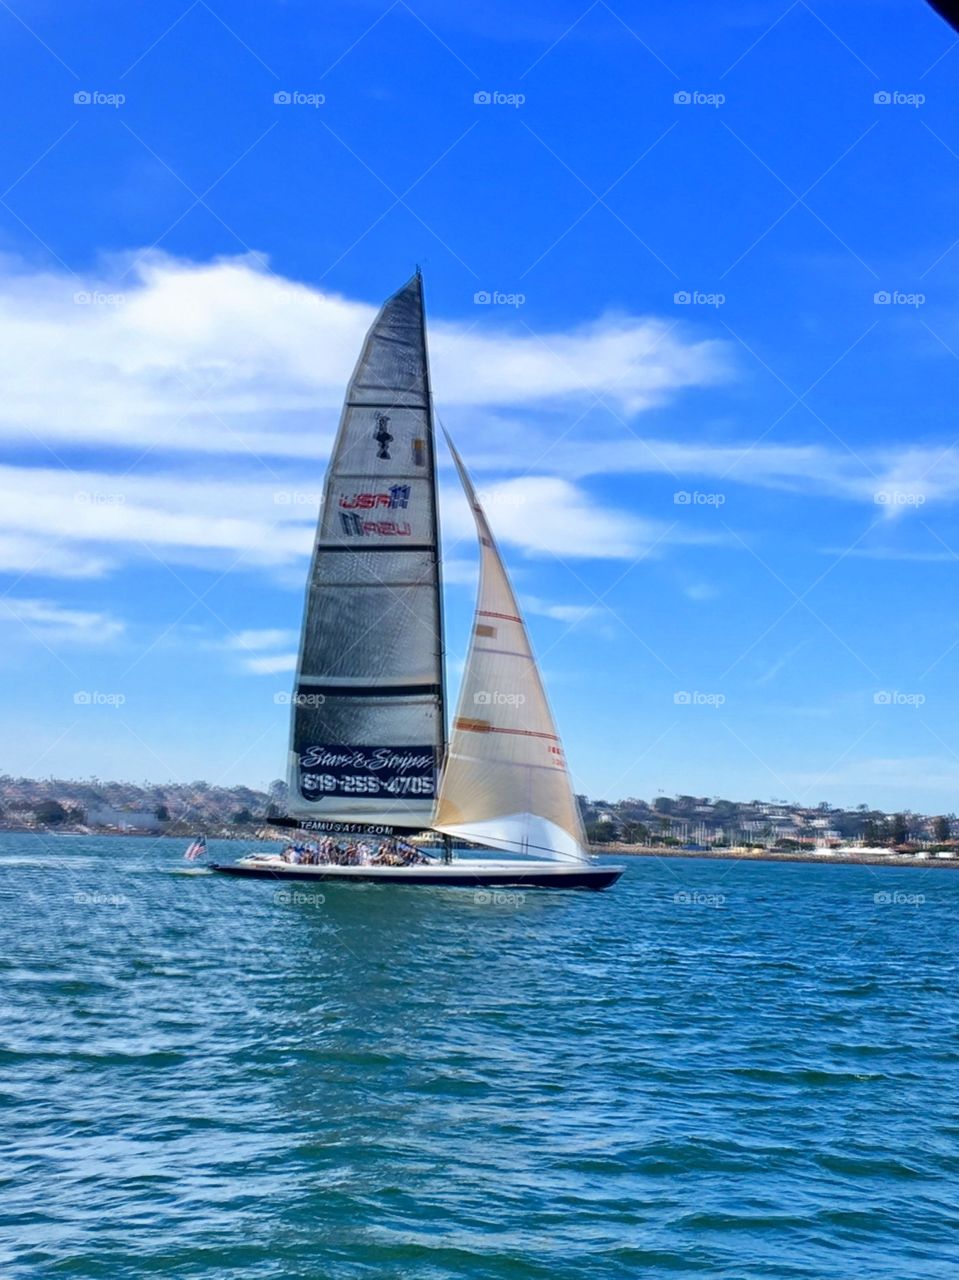 Beautiful,America’s Cup Sailing, Point Loma San Diego 